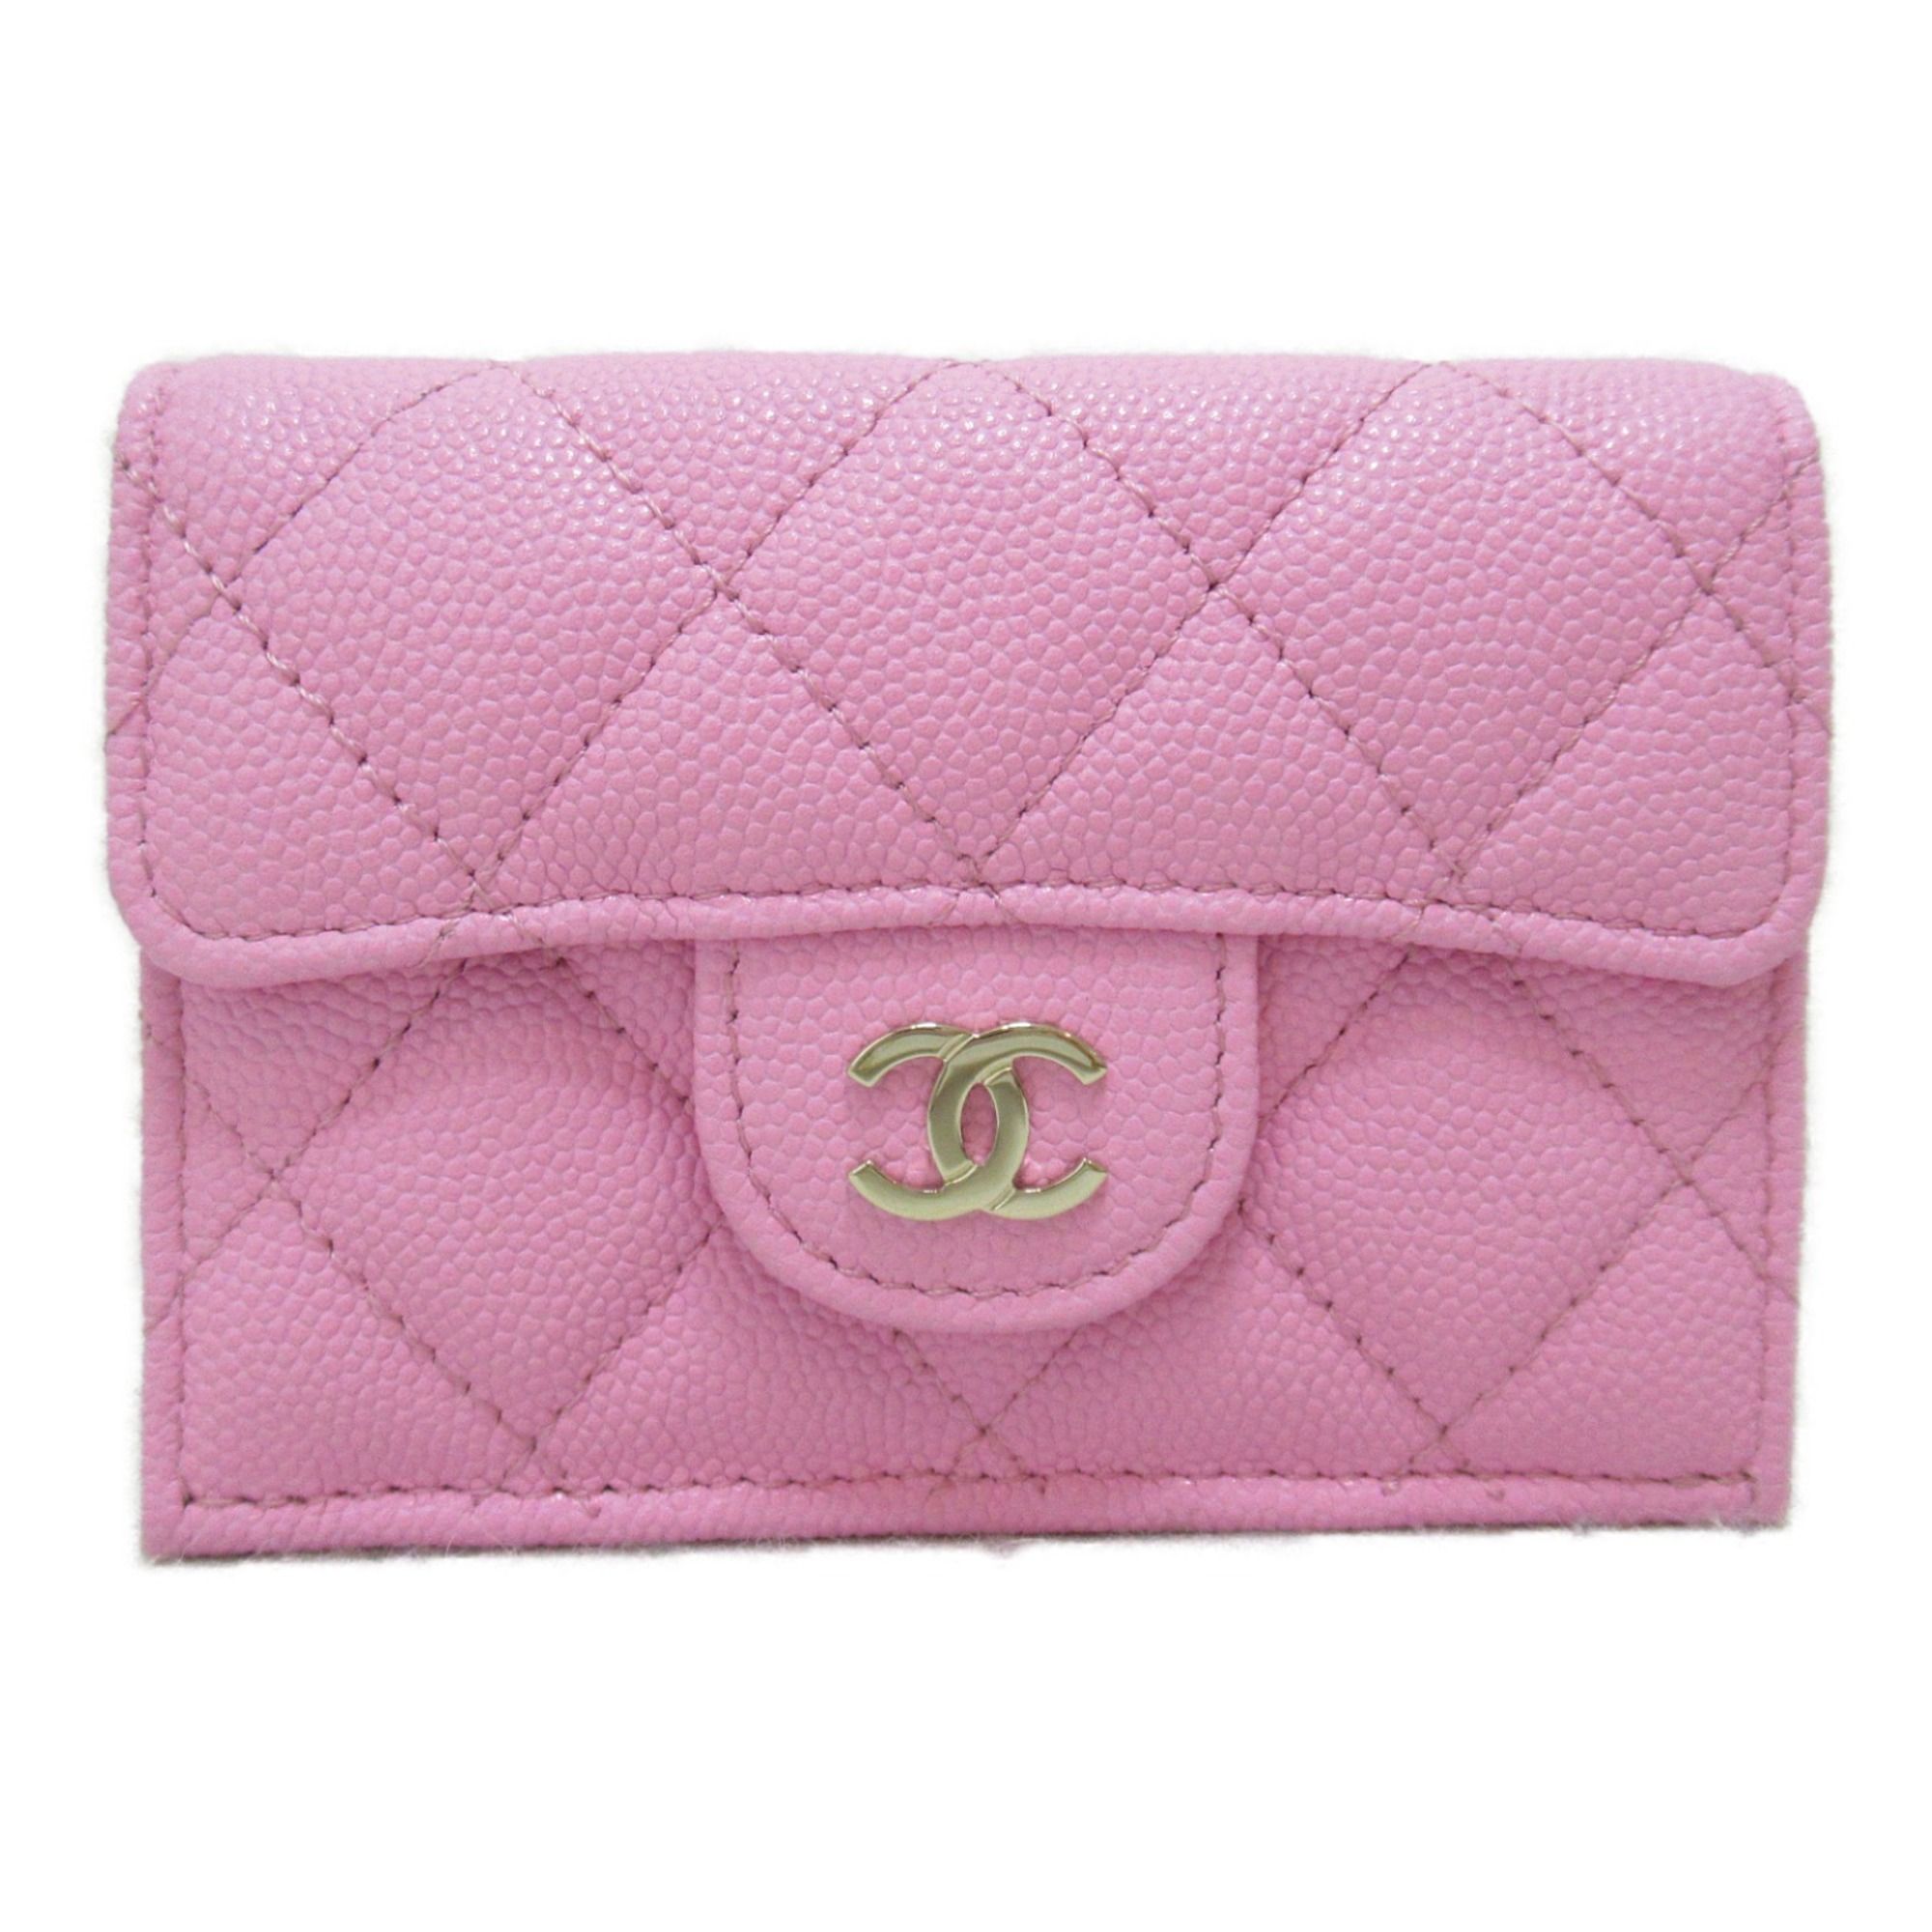 Chanel CHANEL Classic Small Flap Wallet Trifold Wallet Pink Caviar Skin  (Grained Calf) AP0230